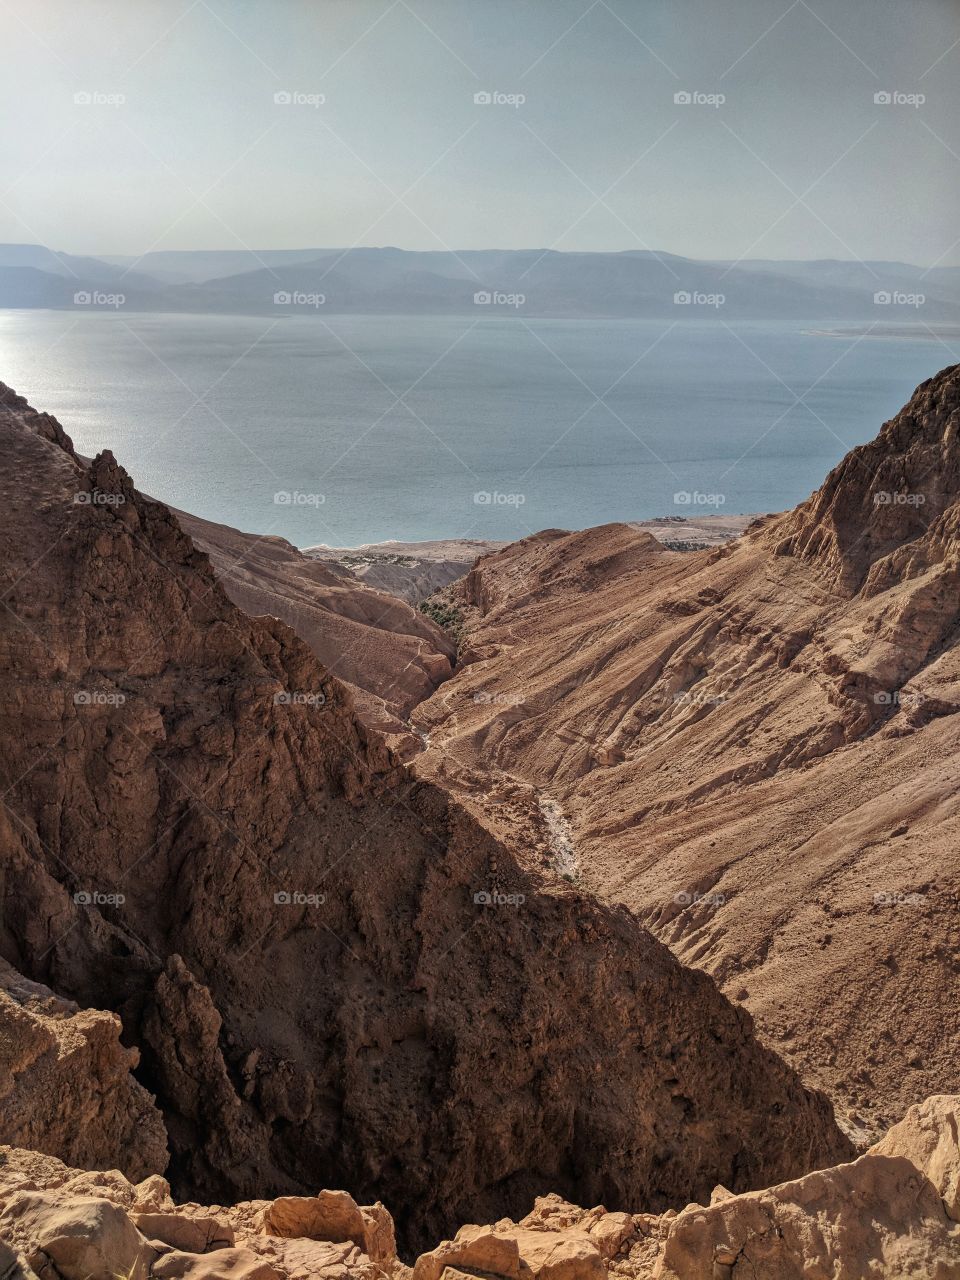 View of Ein Gedi Nature Reserve and the Dead Sea from the cliff